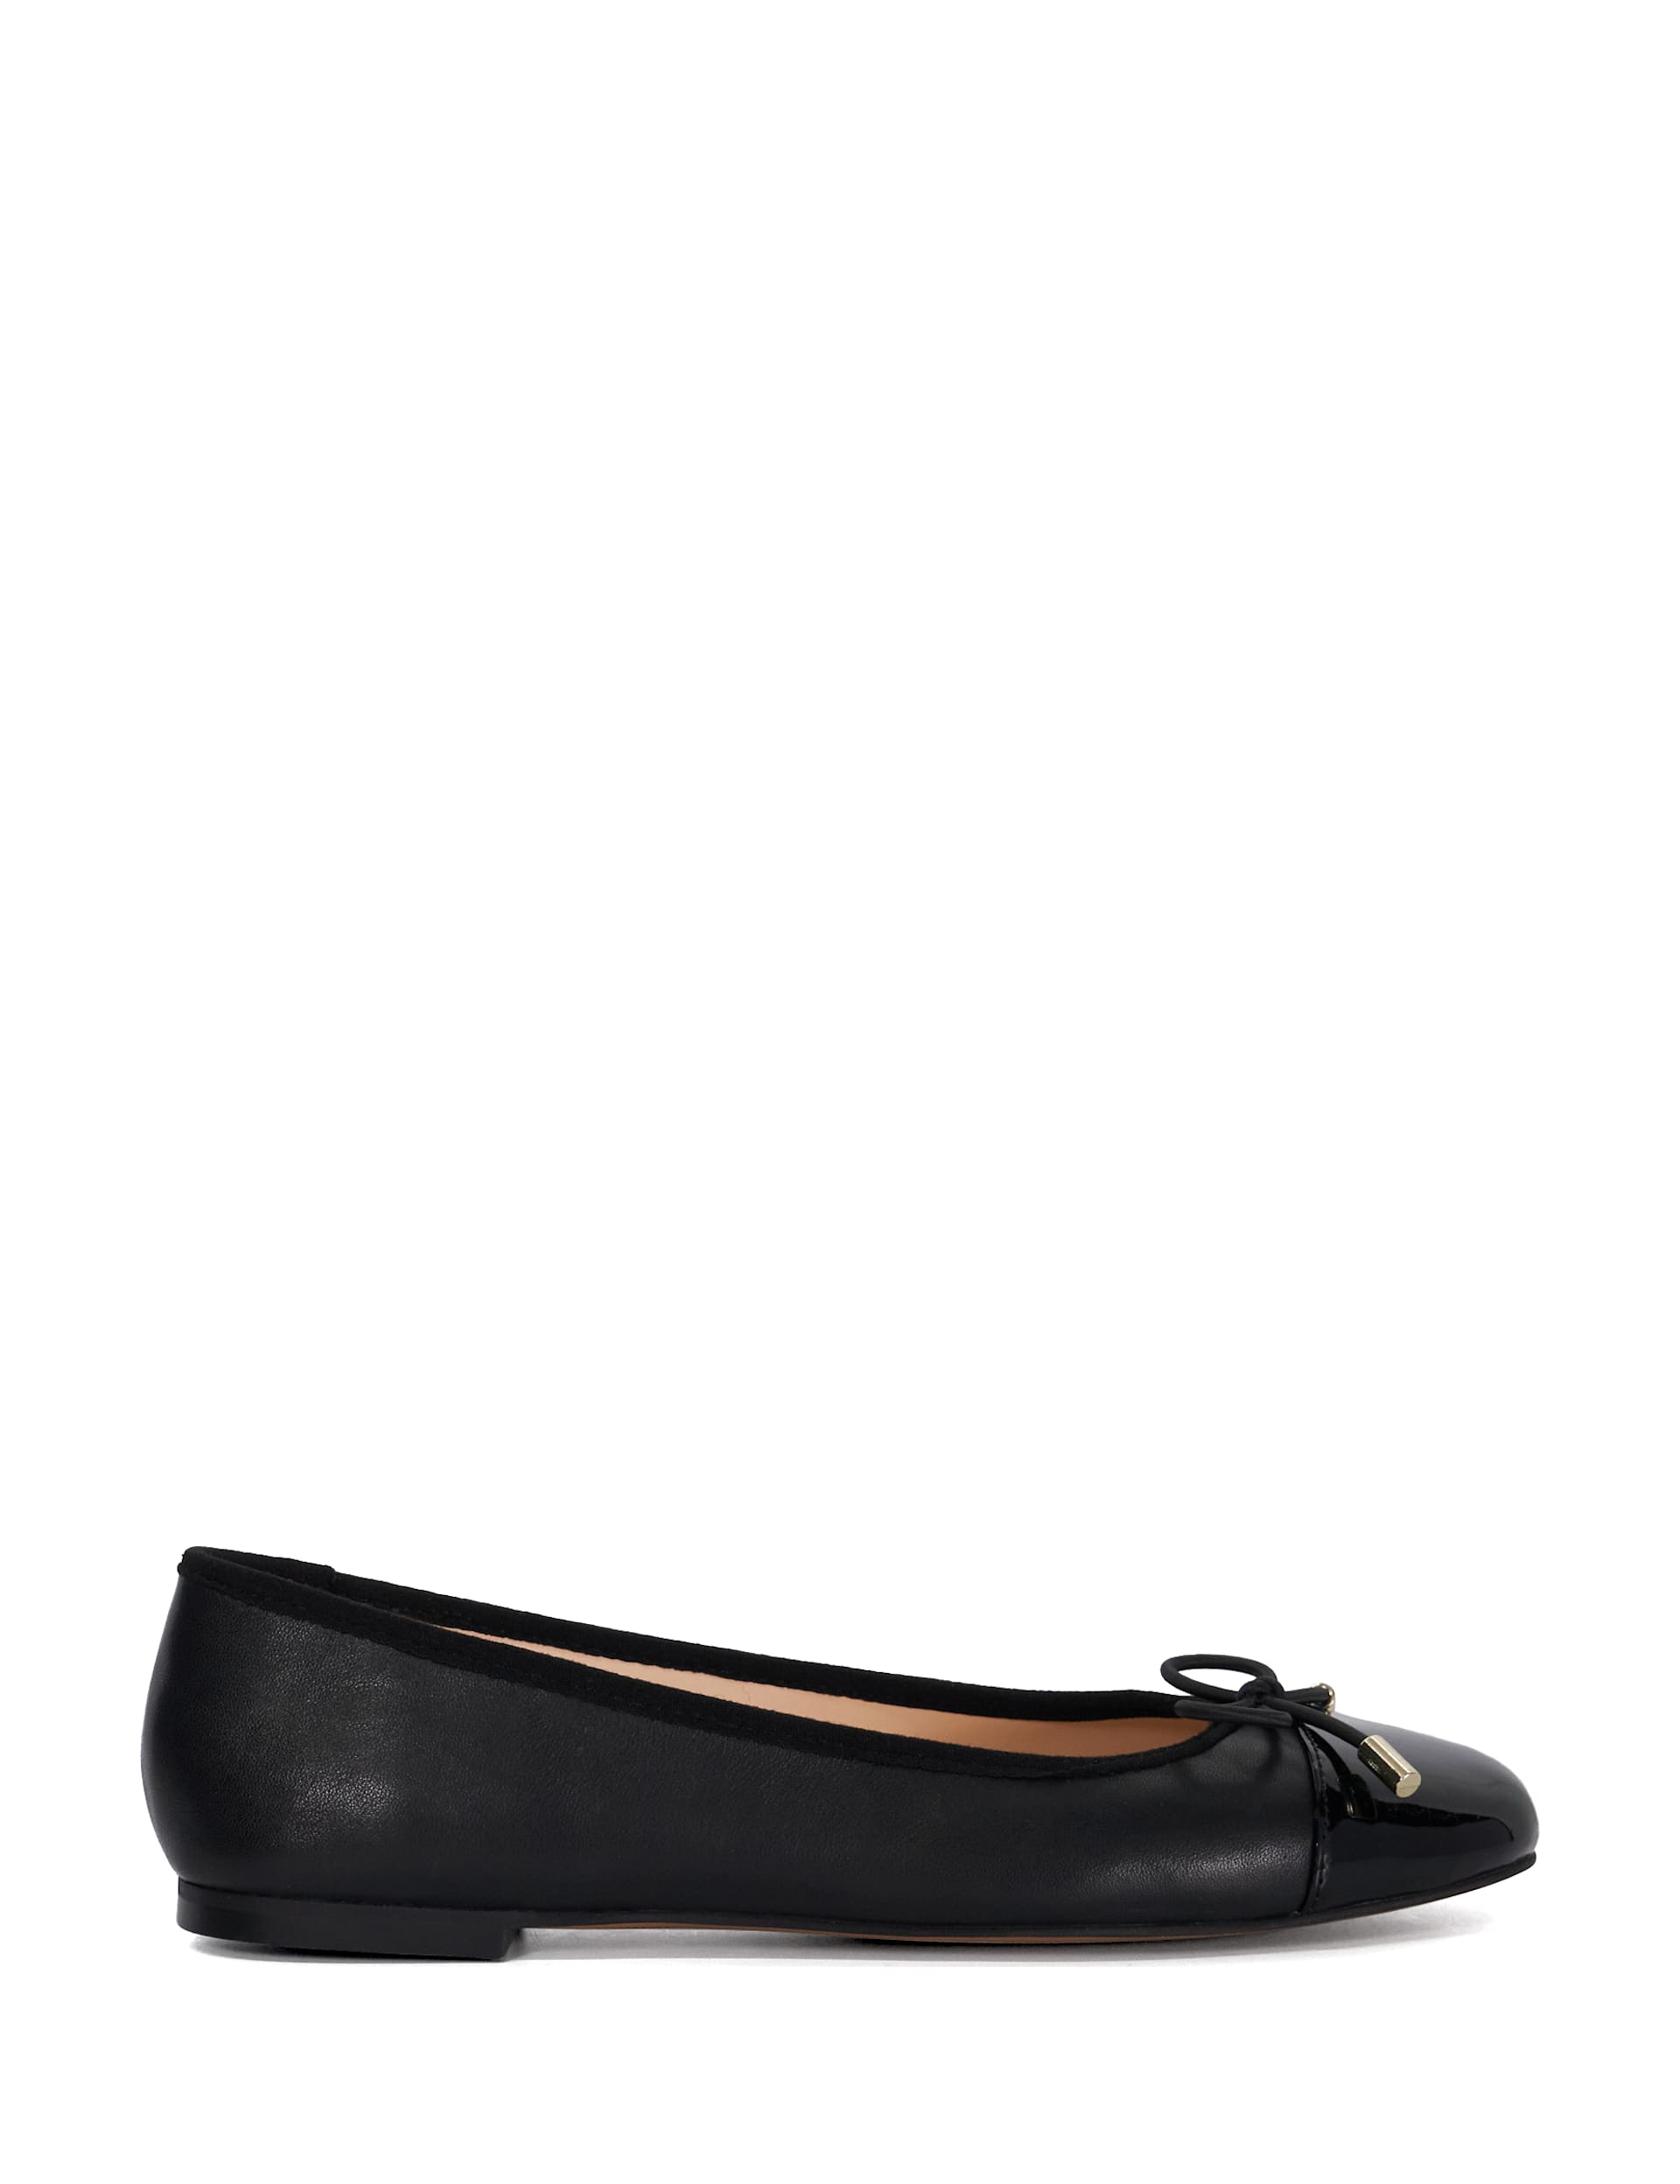 Leather Flat Ballet Pumps 1 of 5